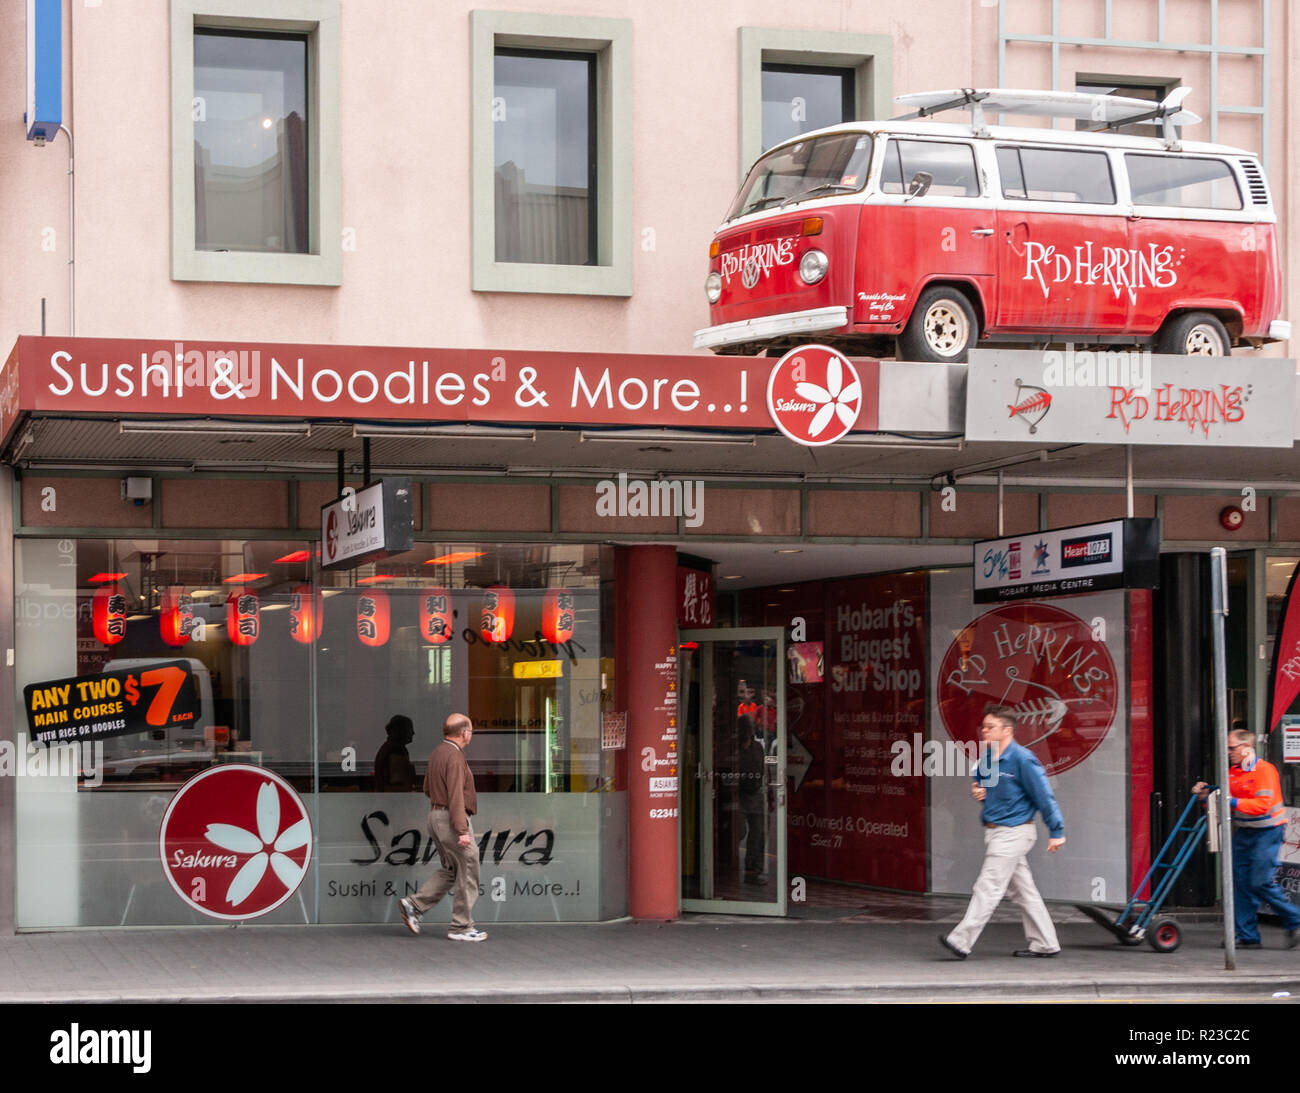 Hobart, Tasmania, Australia - December 14, 2009: Red Herring VW van on  display above two stores in Liverpool Shopping Street, one being a Sushi  resta Stock Photo - Alamy